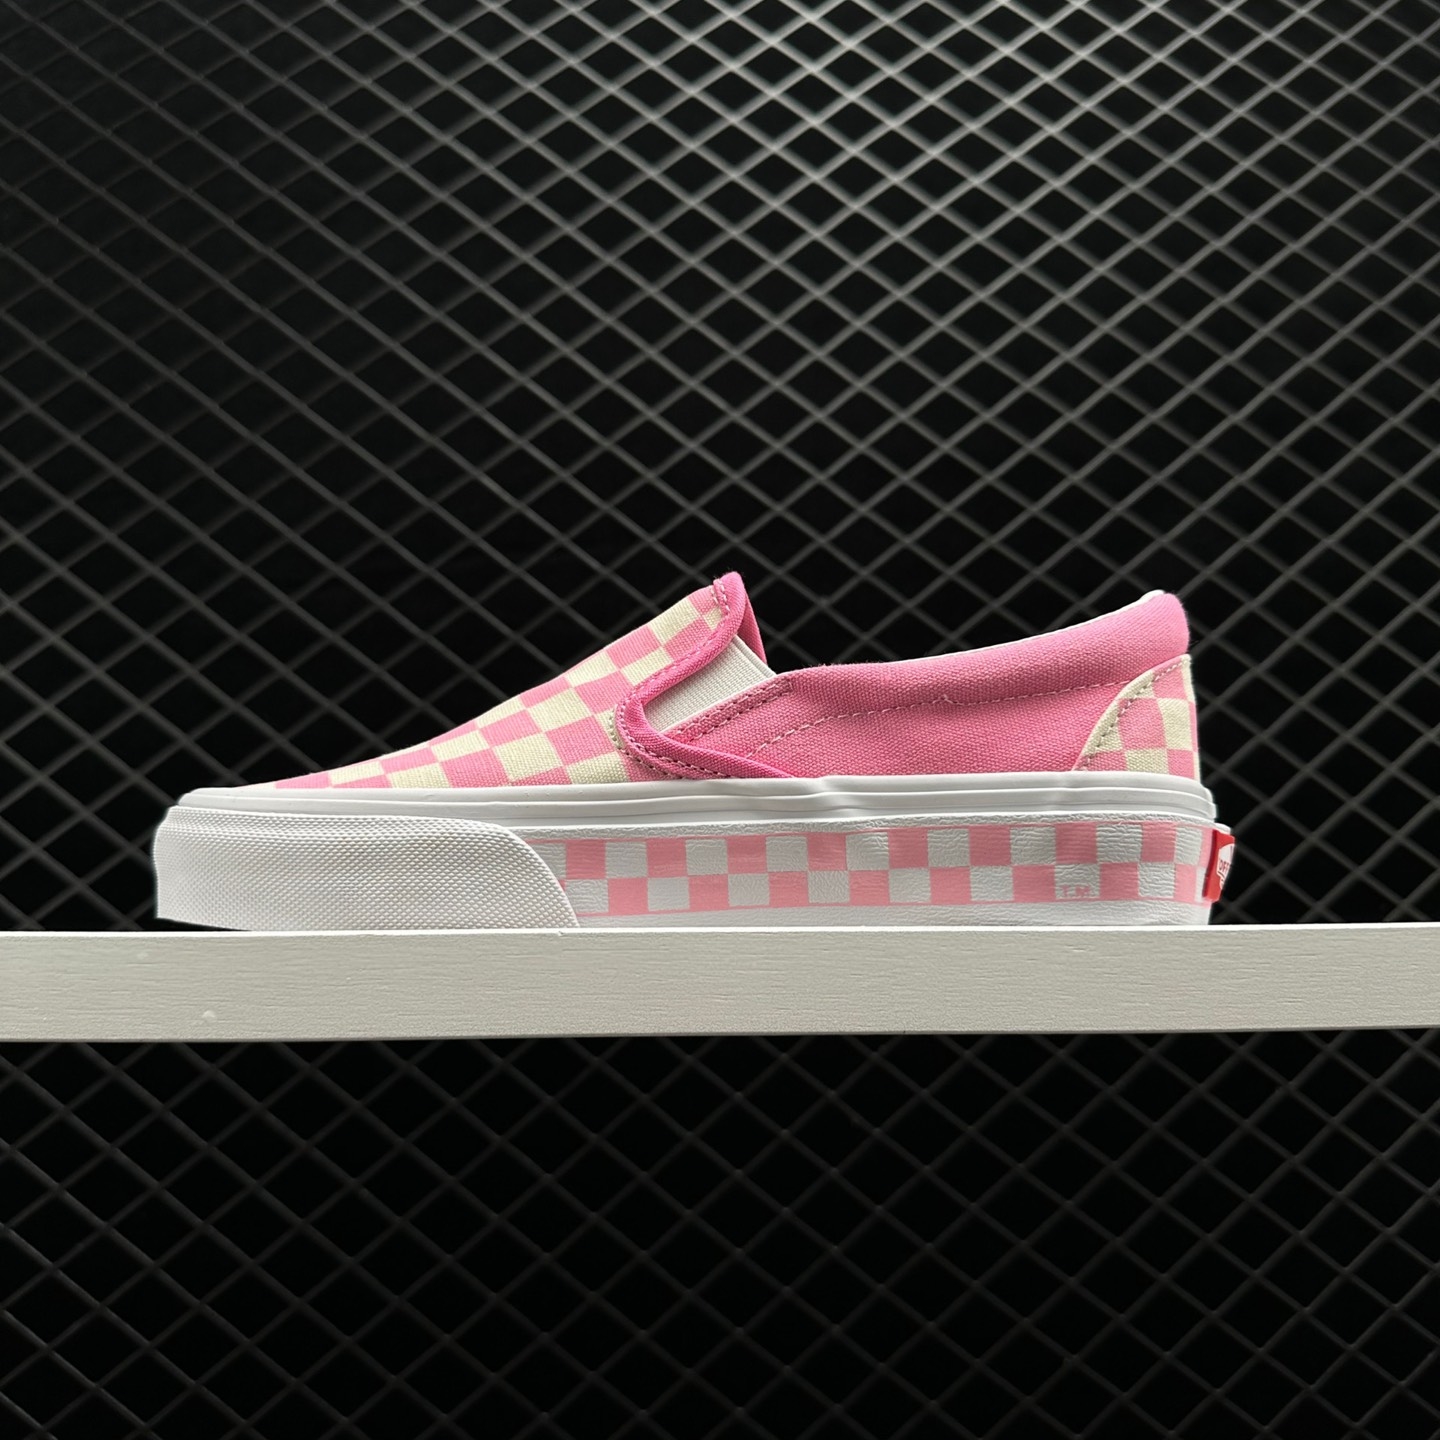 Vans Classic Slip-On Sidewall Check Coral Blush VN0A38F7RA8 - Stylish and Comfortable Slip-On Shoes